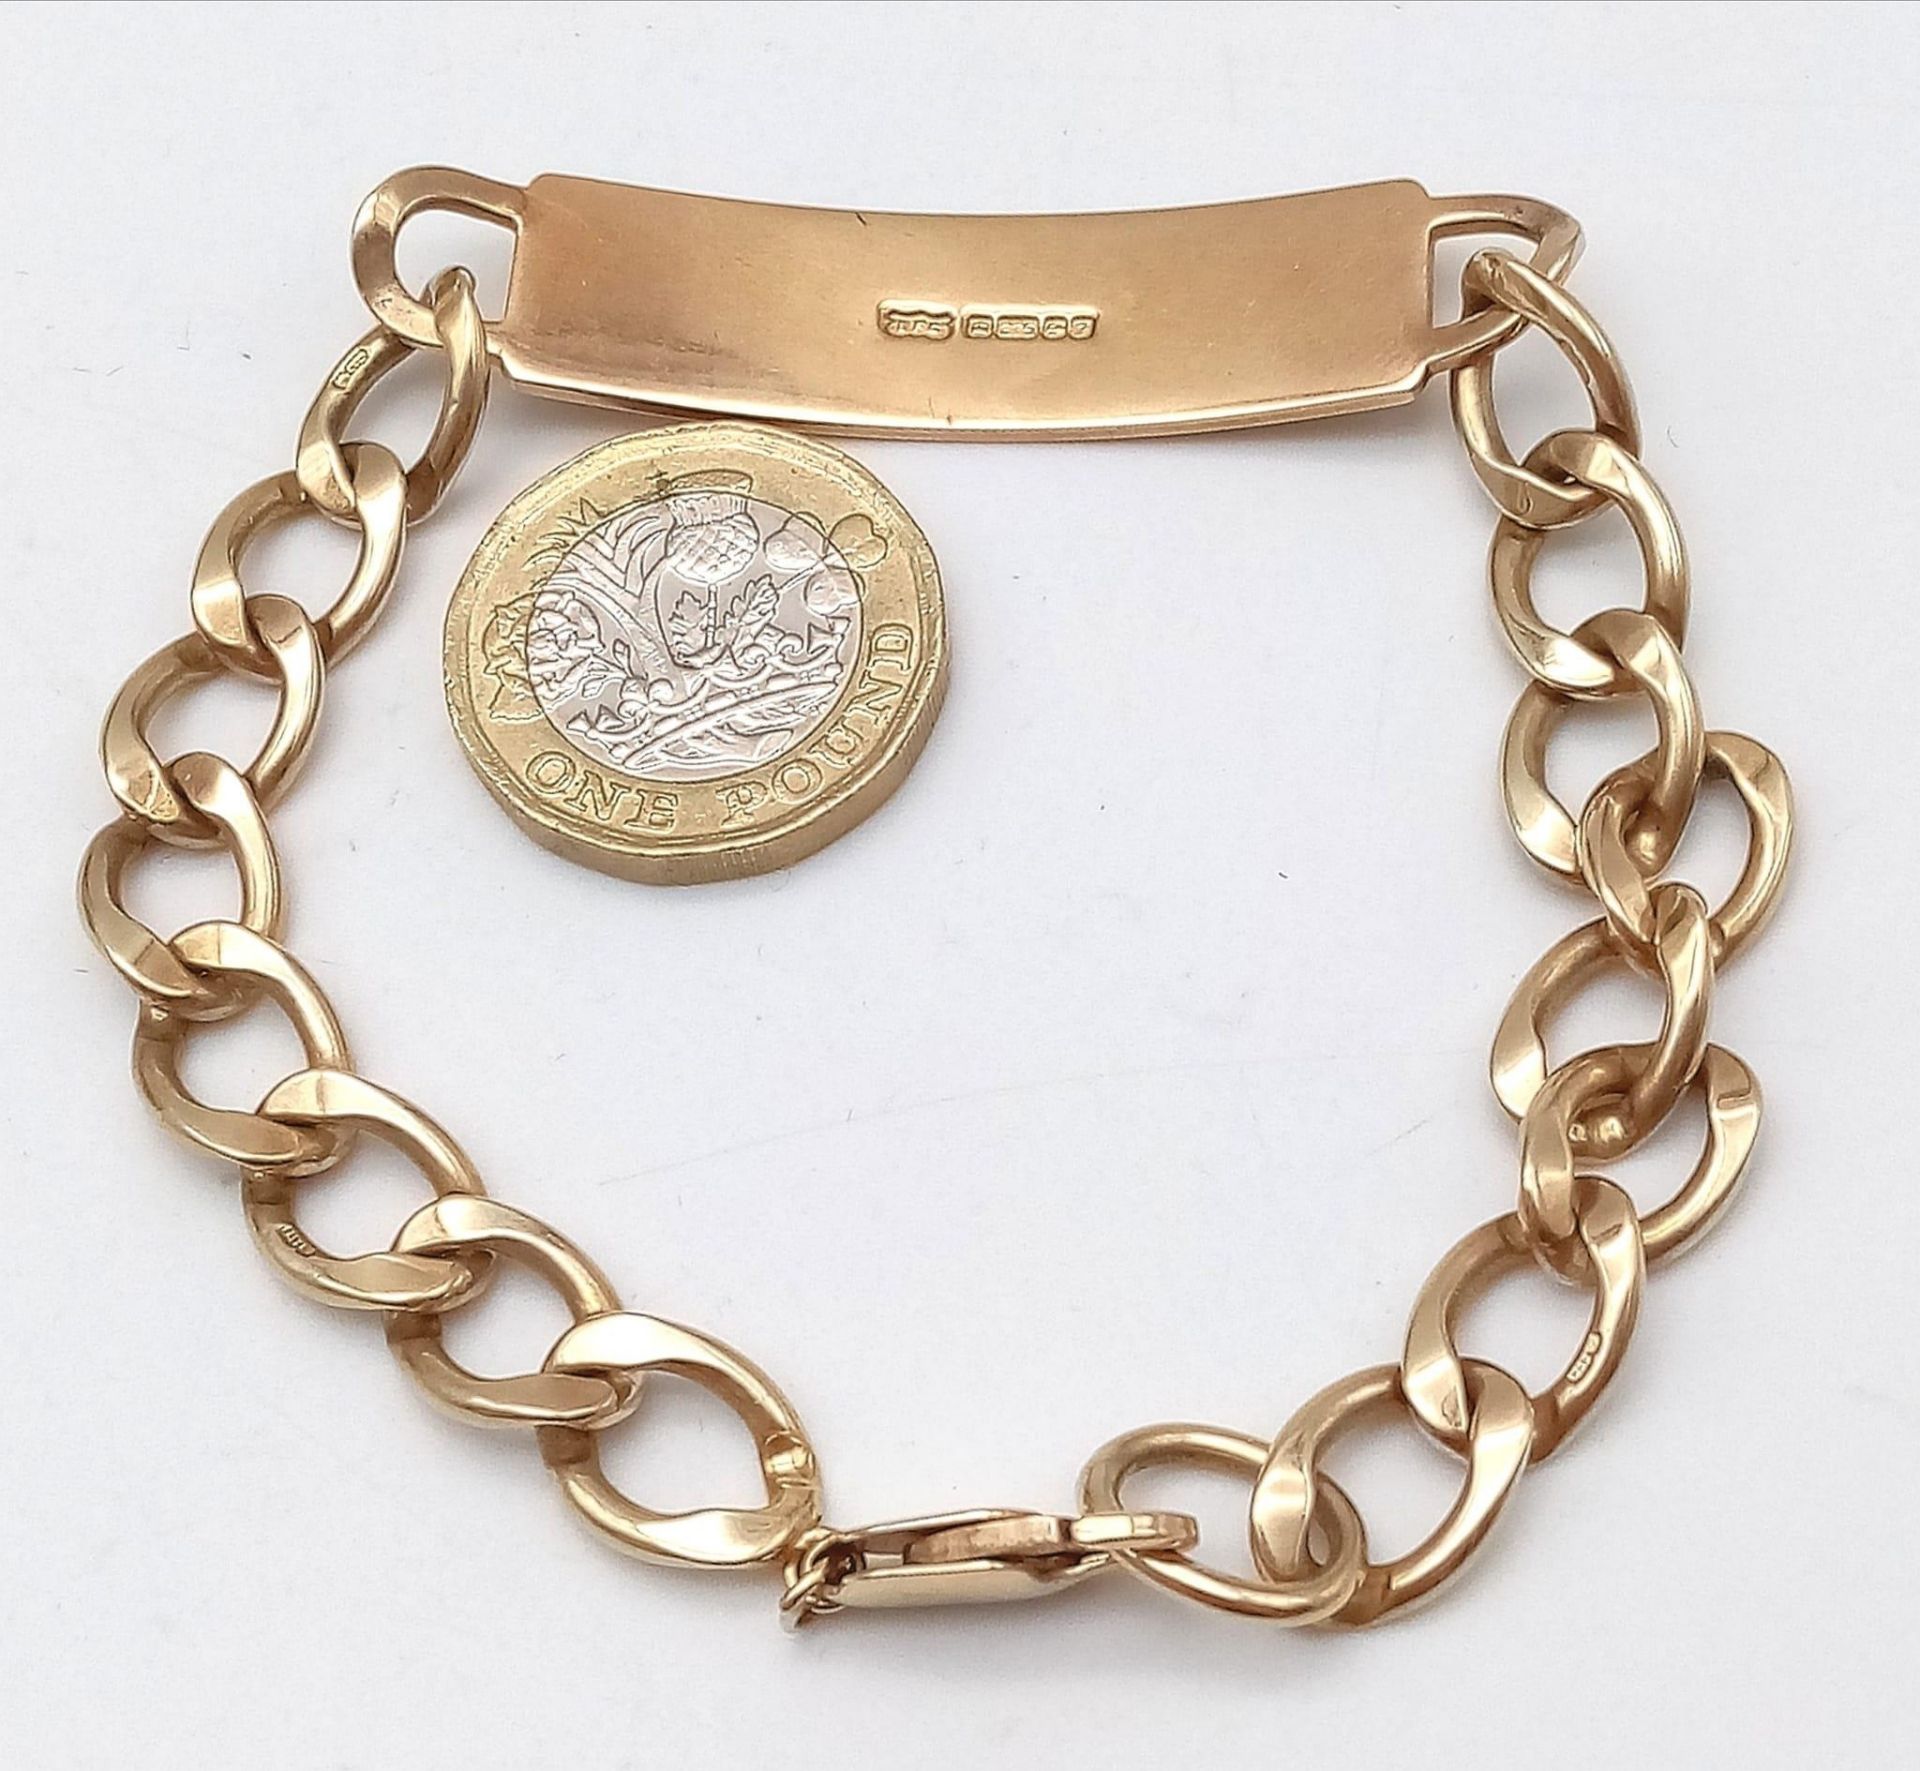 A vintage 9K Gold Curb Chain Men's ID Bracelet. Fully hallmarked, measures 22cm in length. Not - Image 2 of 5